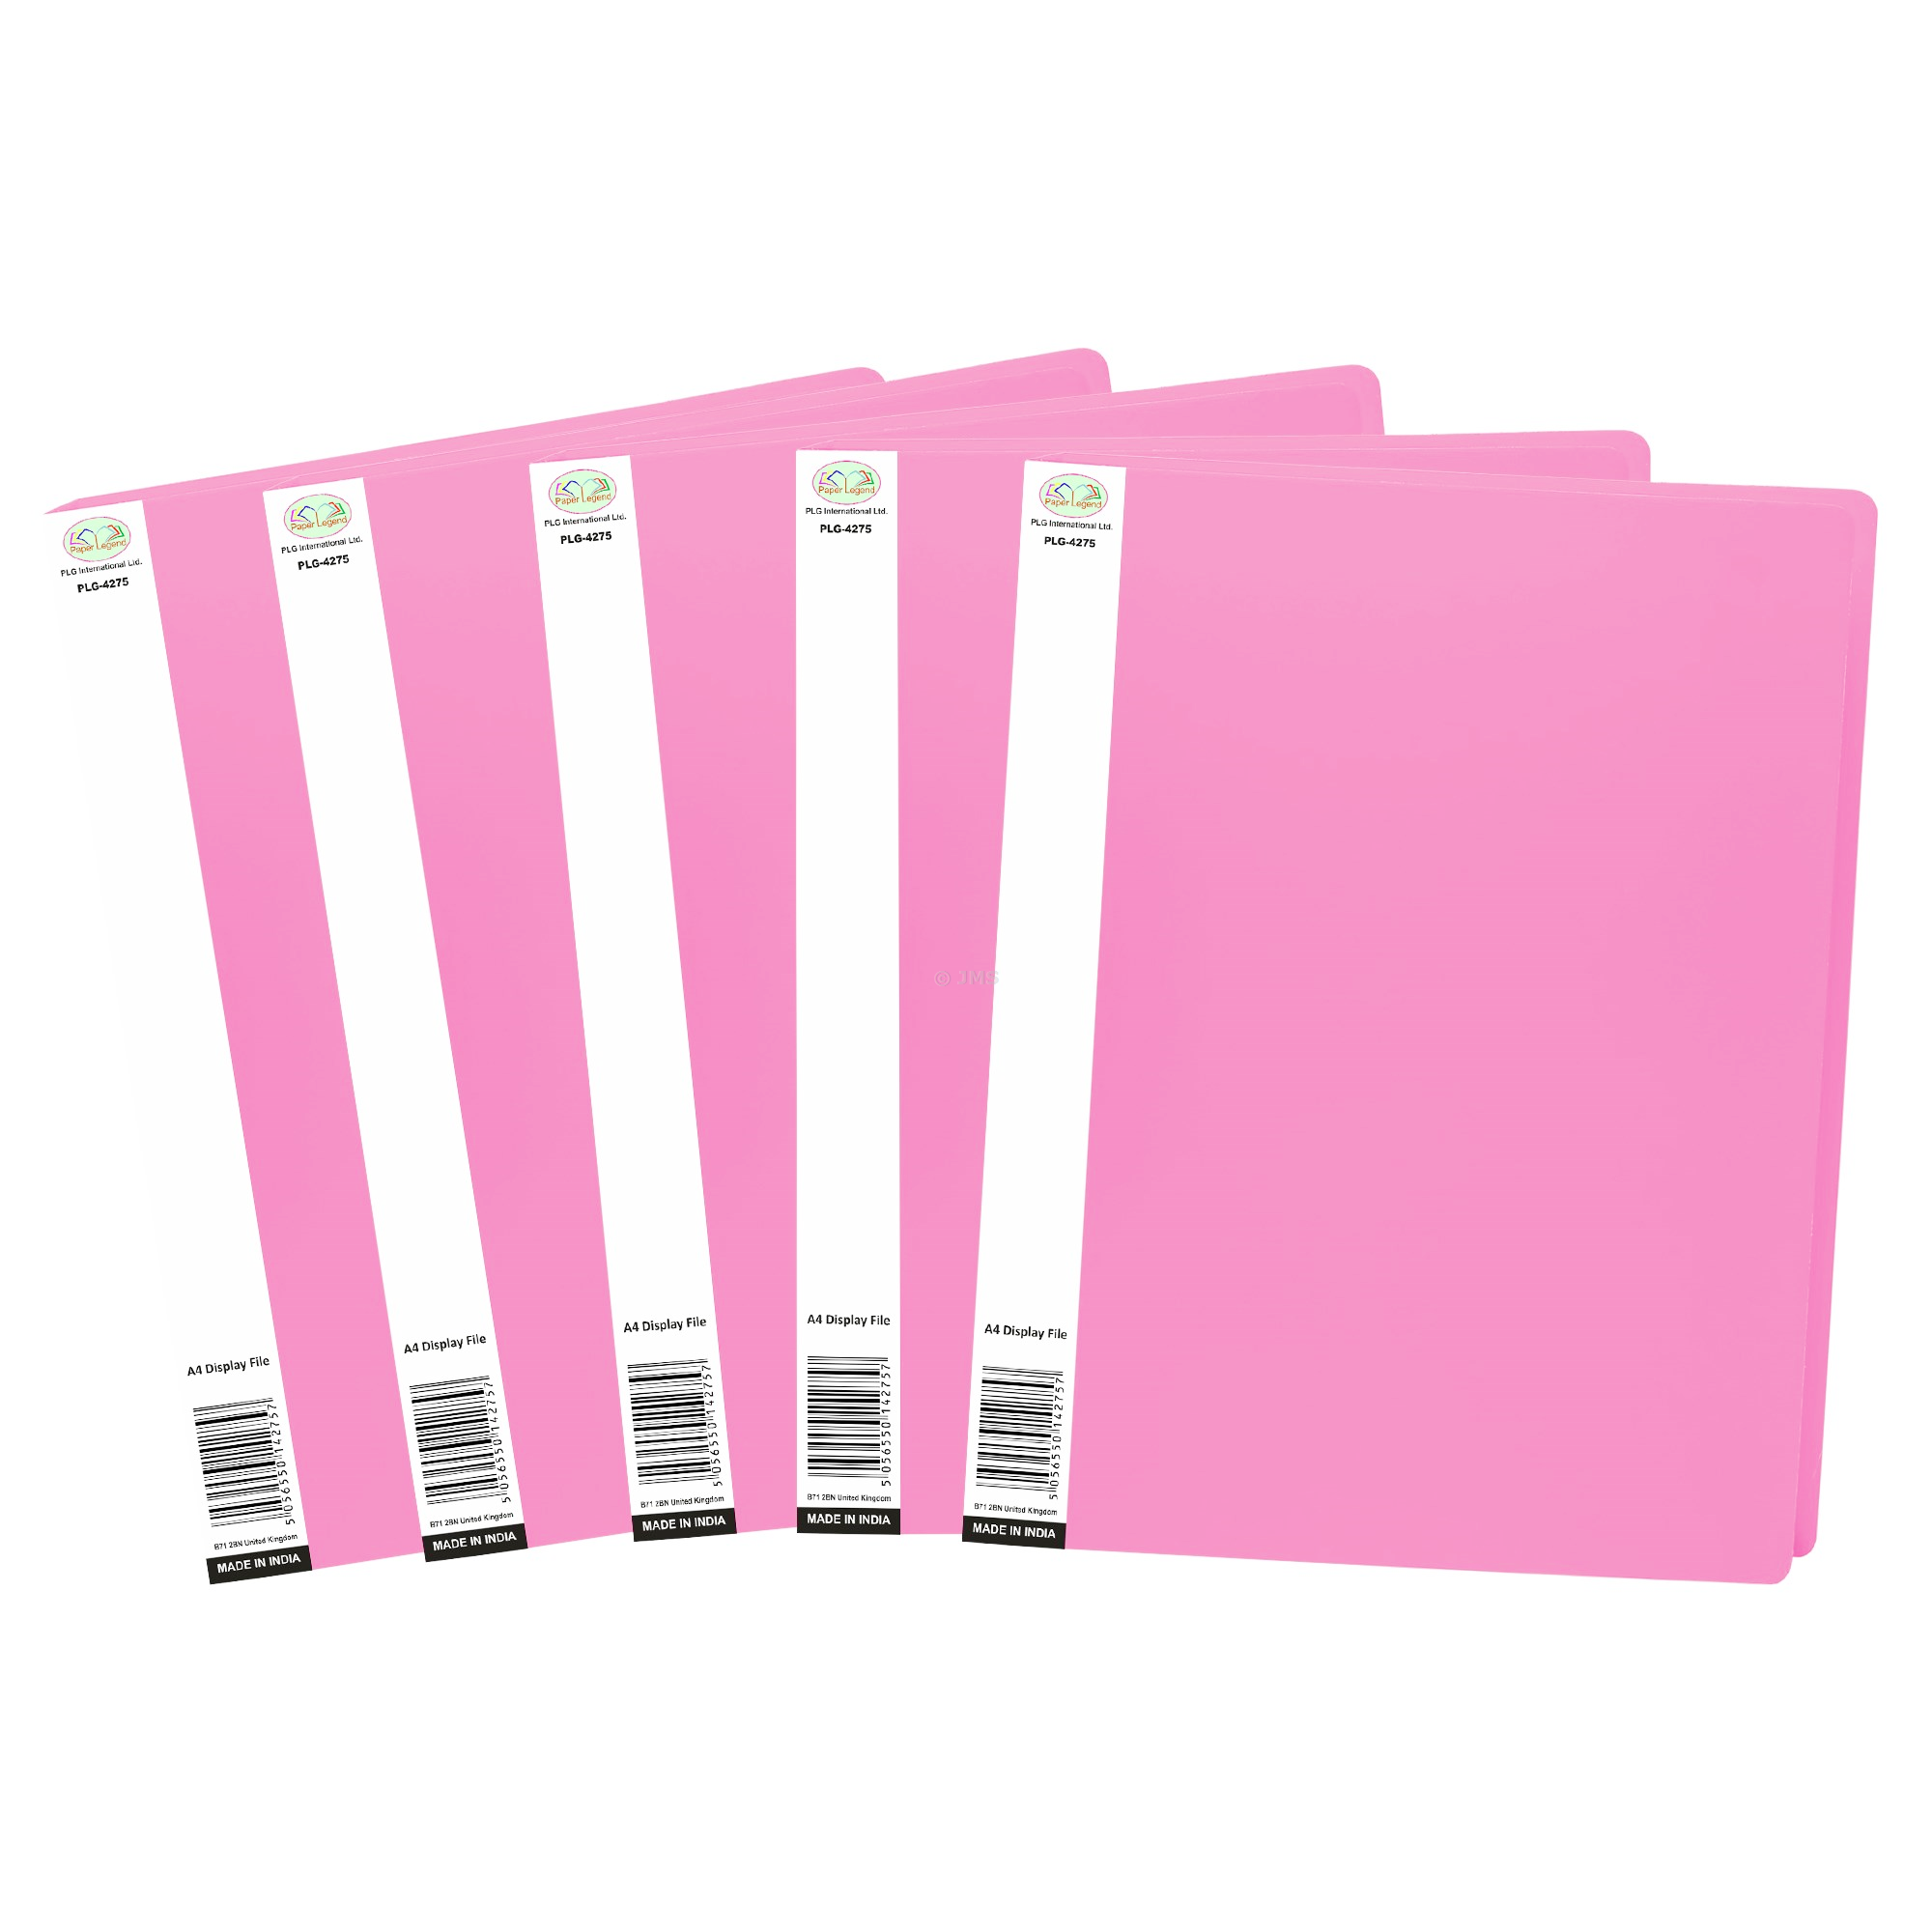 (Pack of 5) A4 Display Book Folders with Plastic Sleeves Pink Display File Display Books Document Clear Folders Portfolio Presentation Holder Project Folders - 20 Pocket/40 View Page